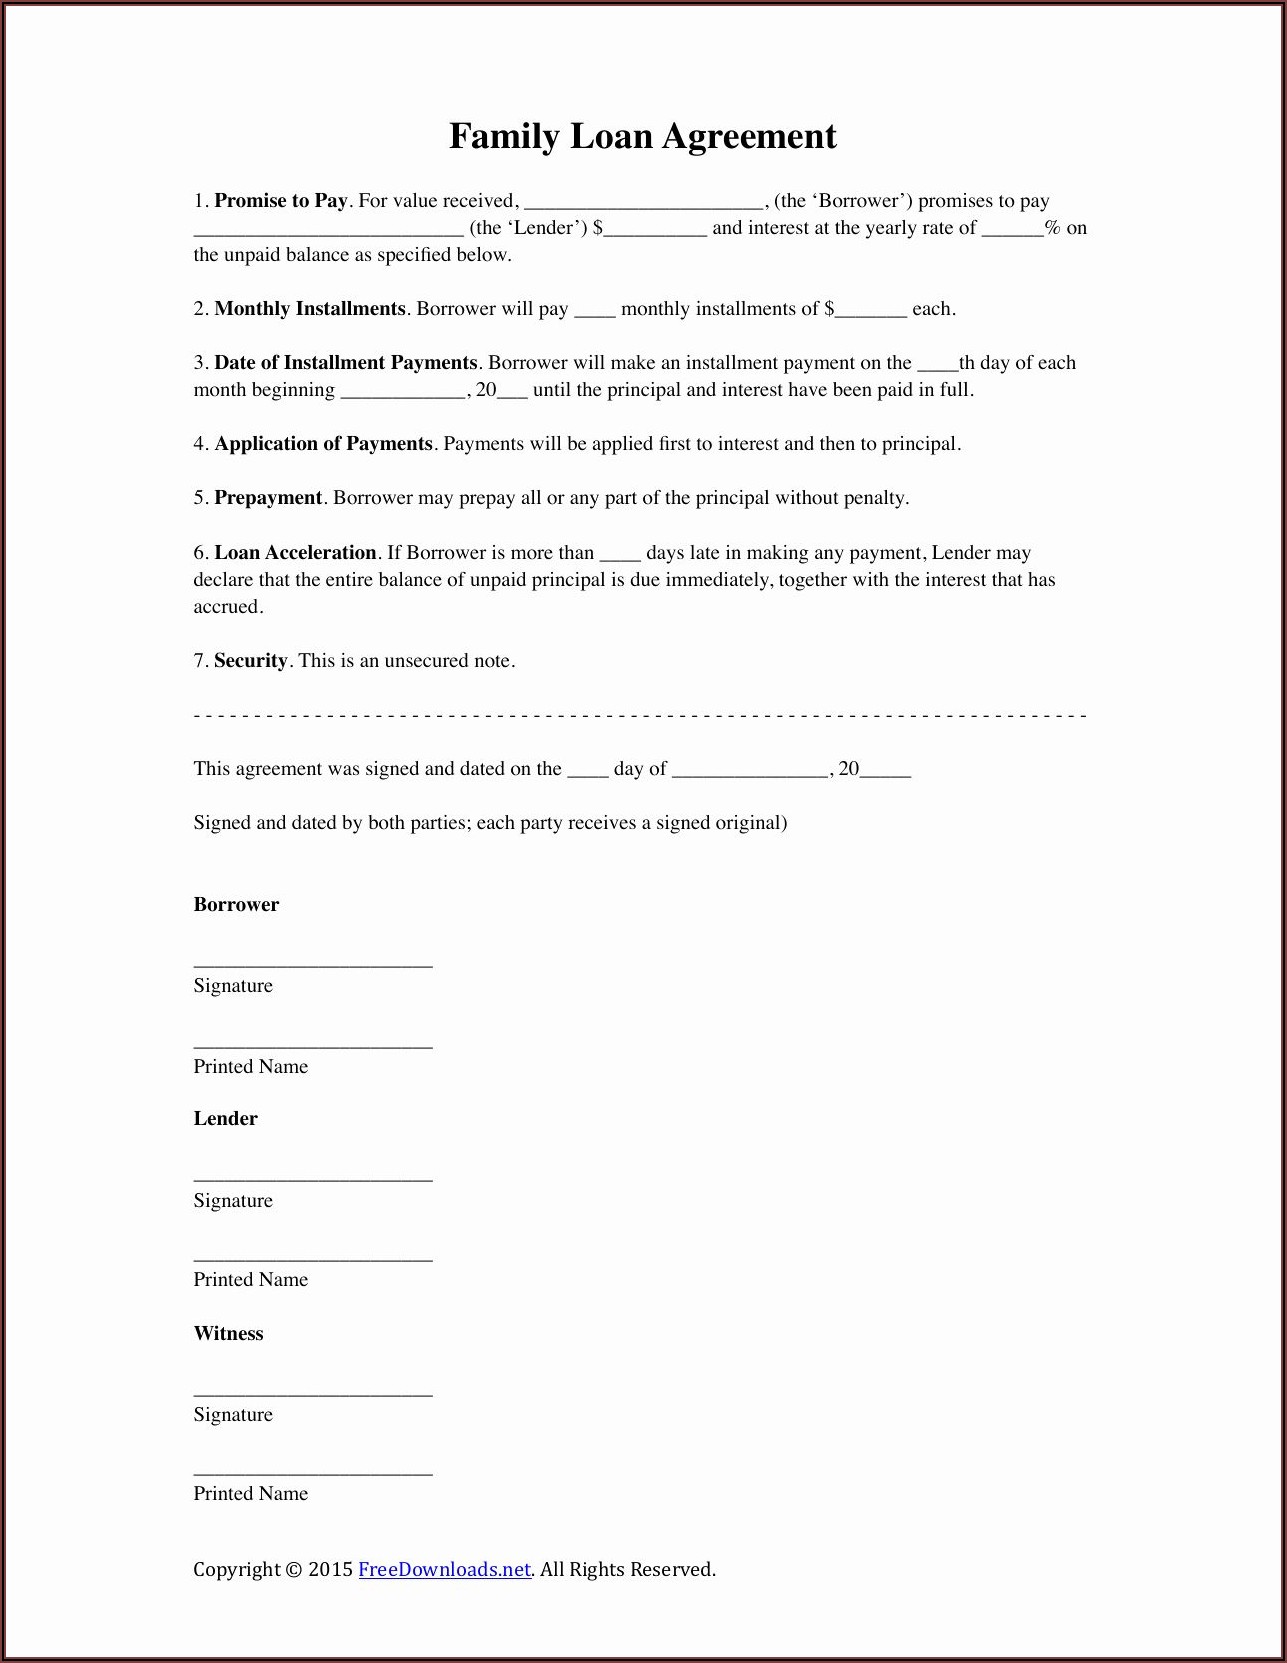 Personal Family Loan Agreement Template